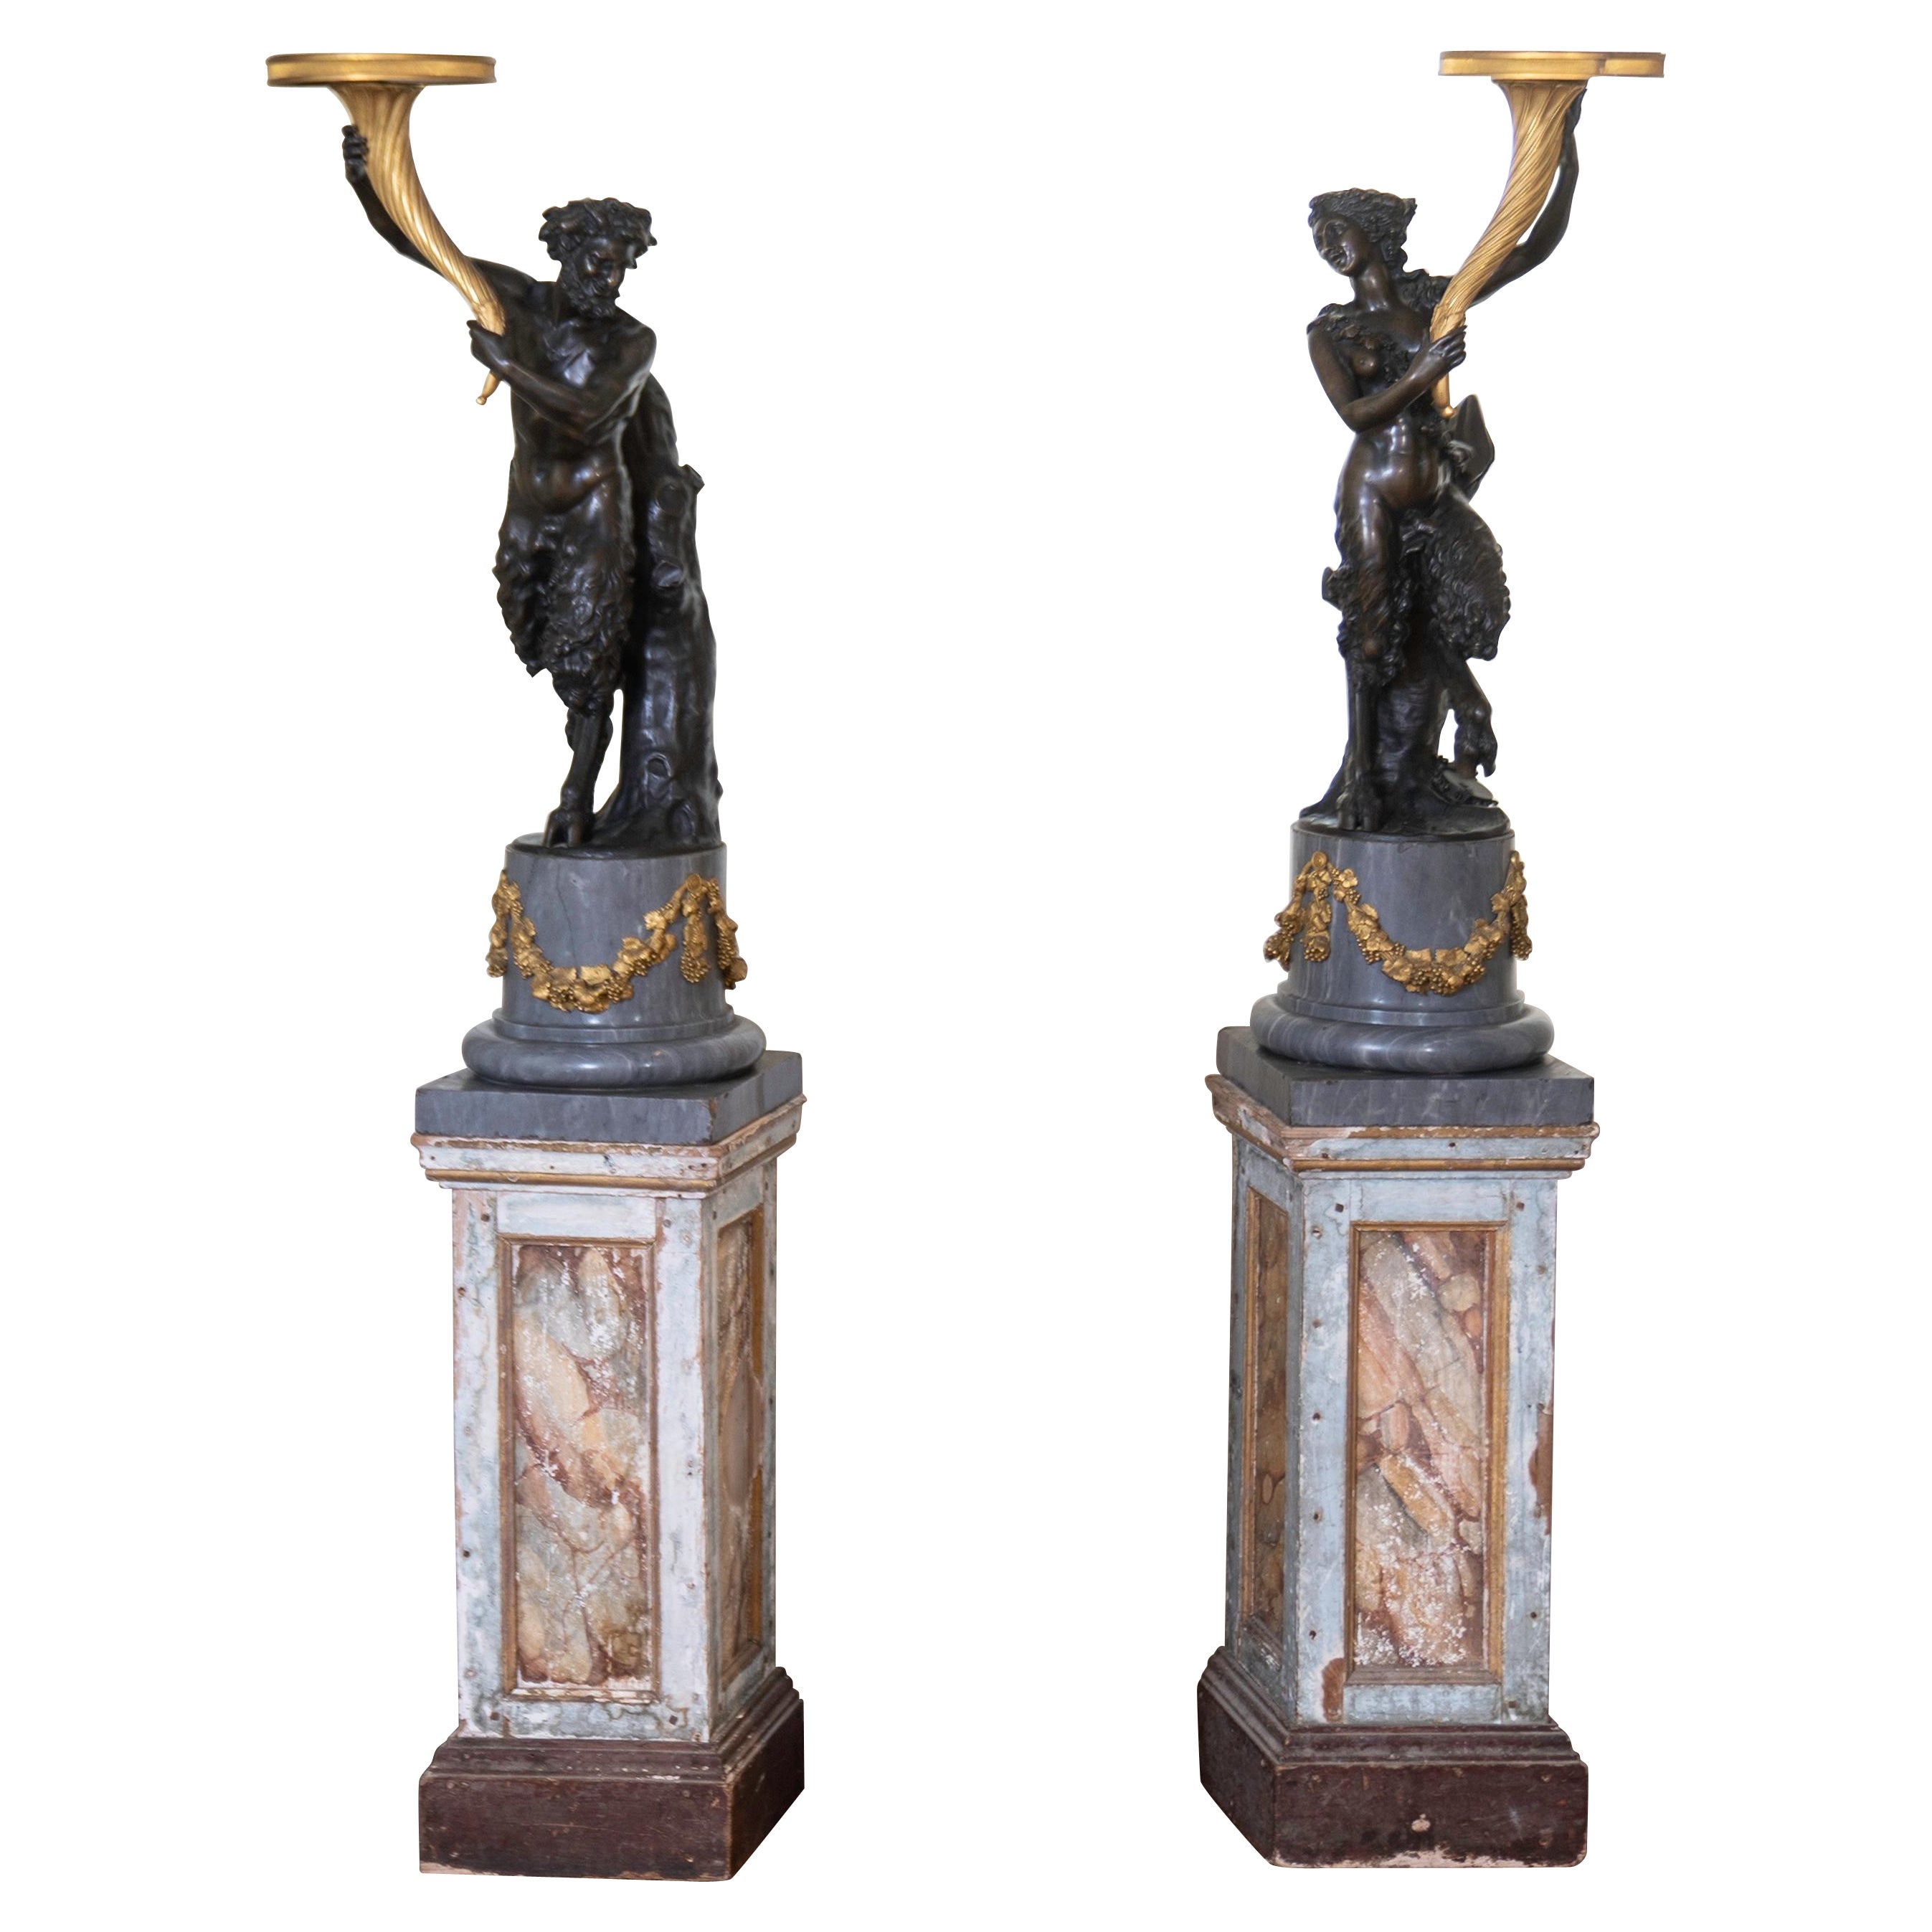 Pair of French 18th Century Bronze Statues of Satyrs, Signed Clodion For Sale